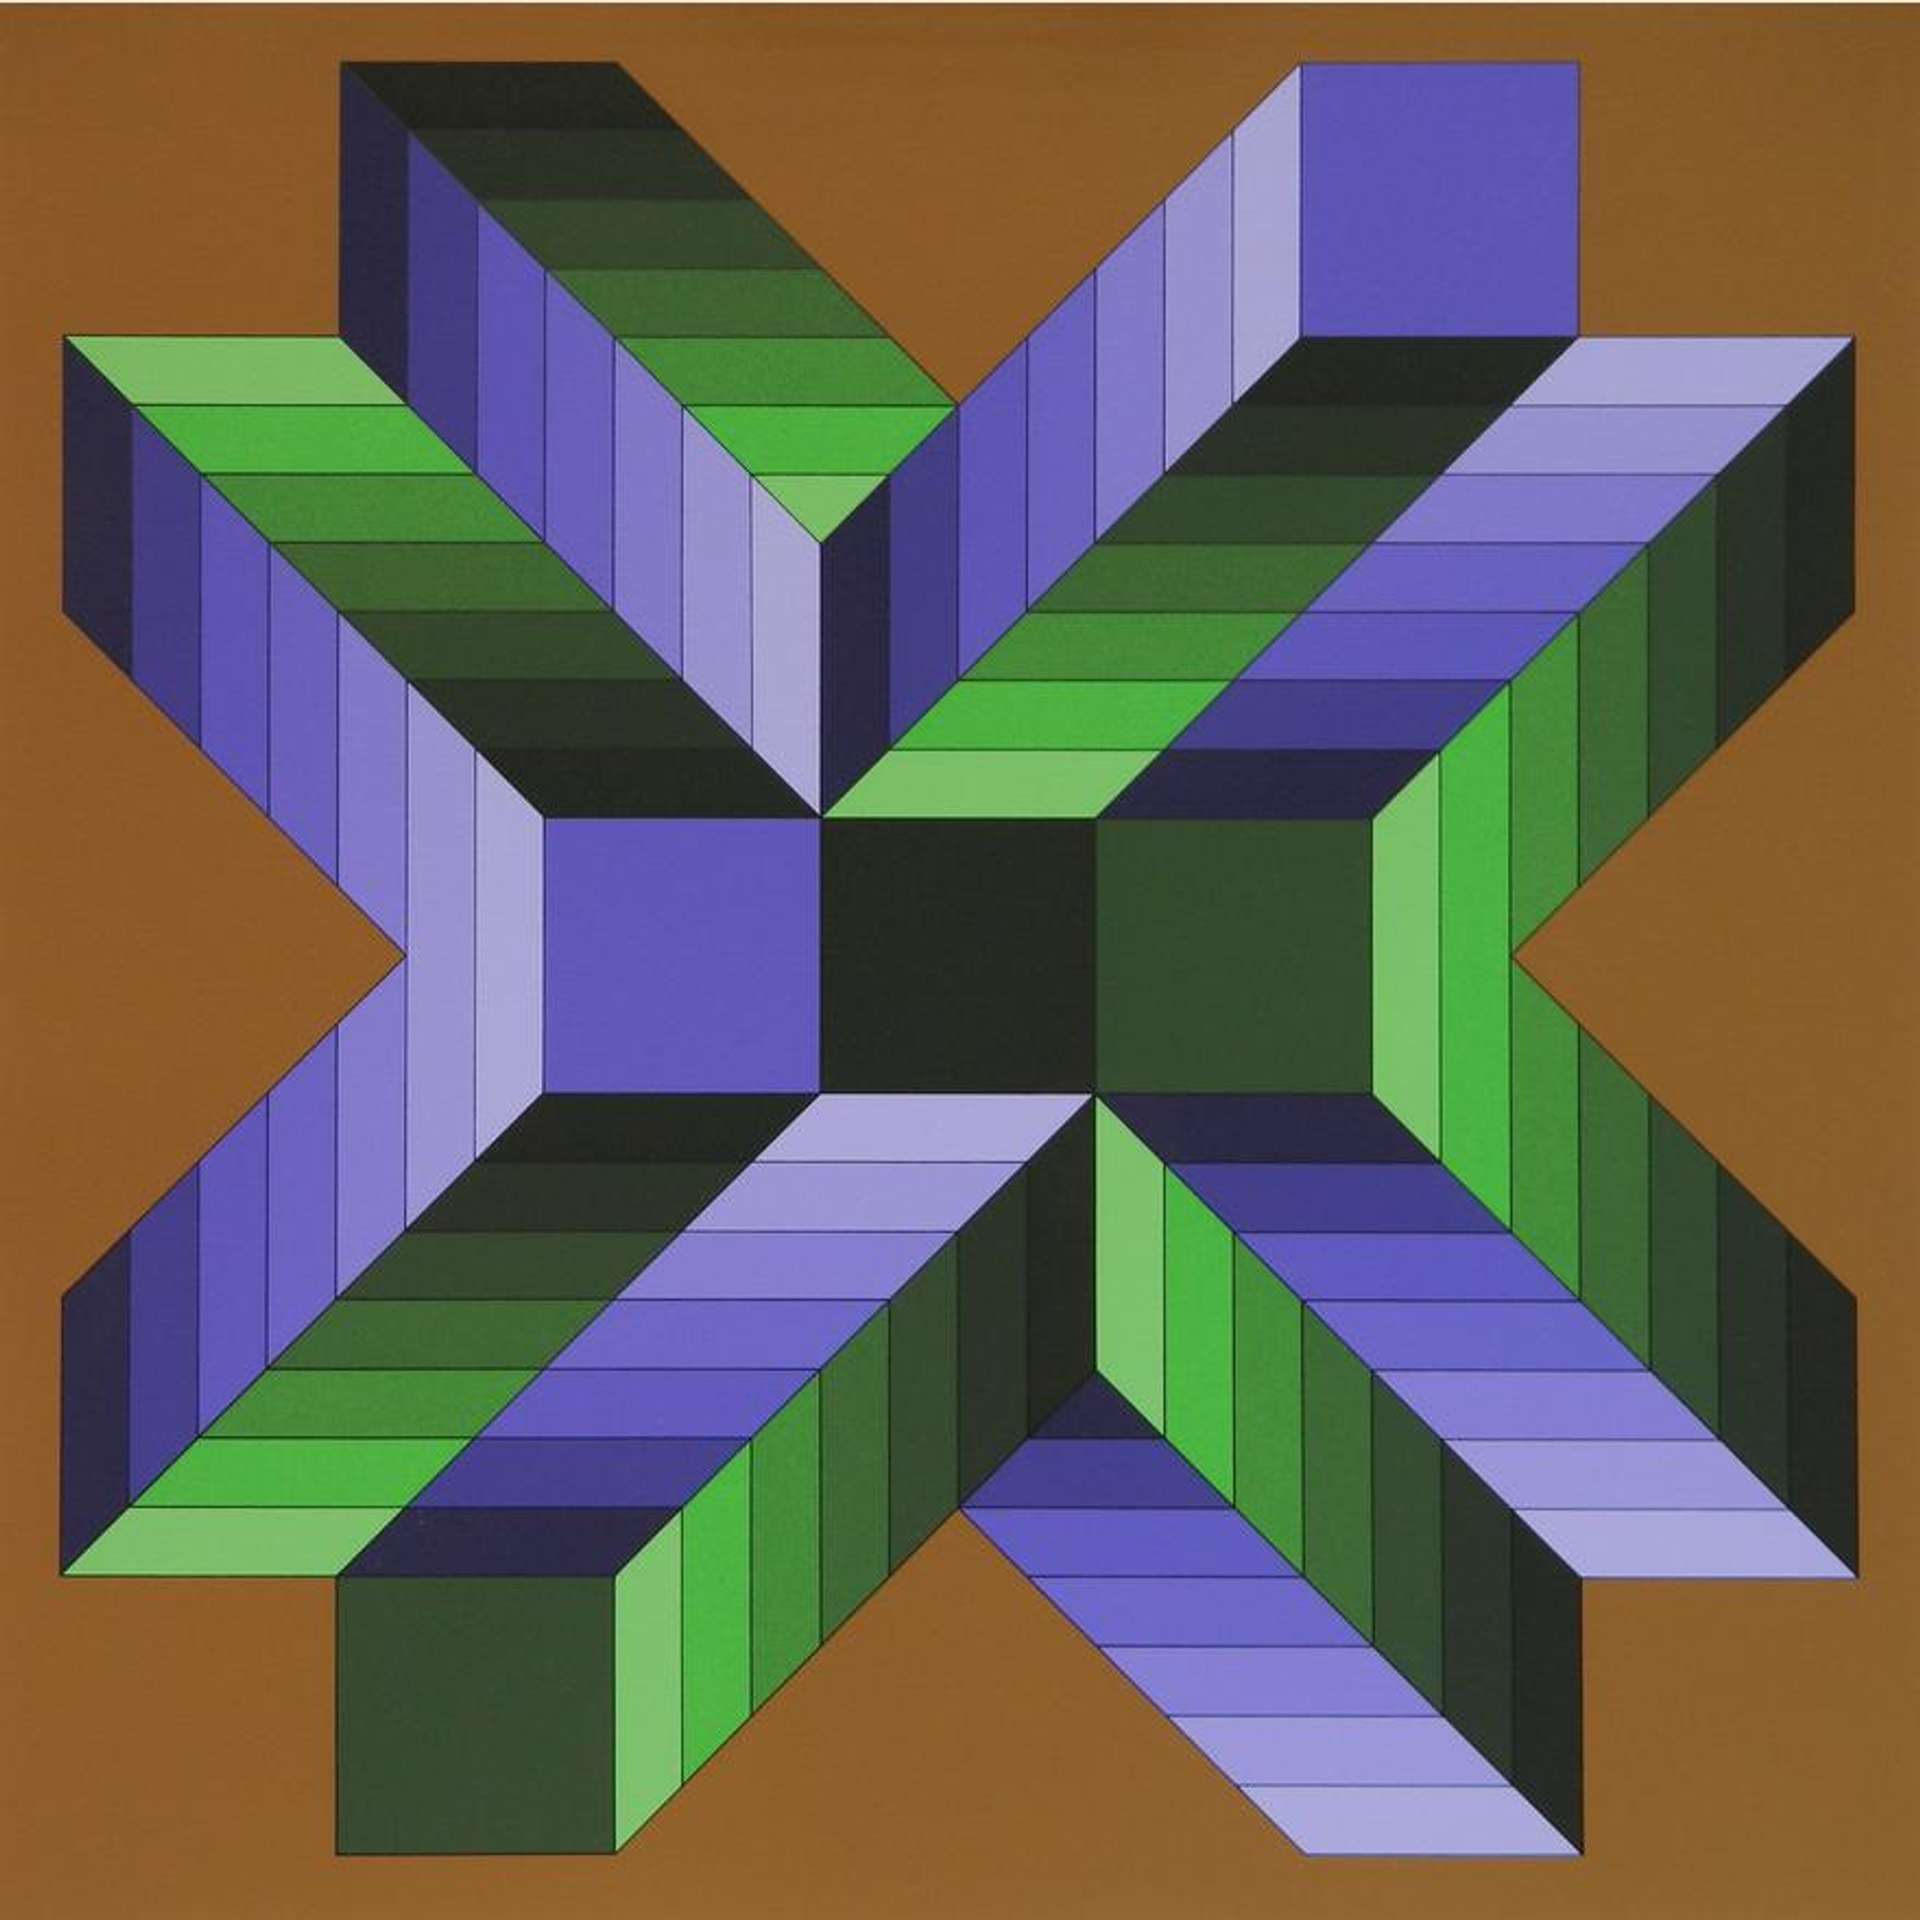 Mata-Fem by Victor Vasarely (1978). The print is comprised of conjoined gren and purple cuboids in an asterisk shape, on a bronze ground.